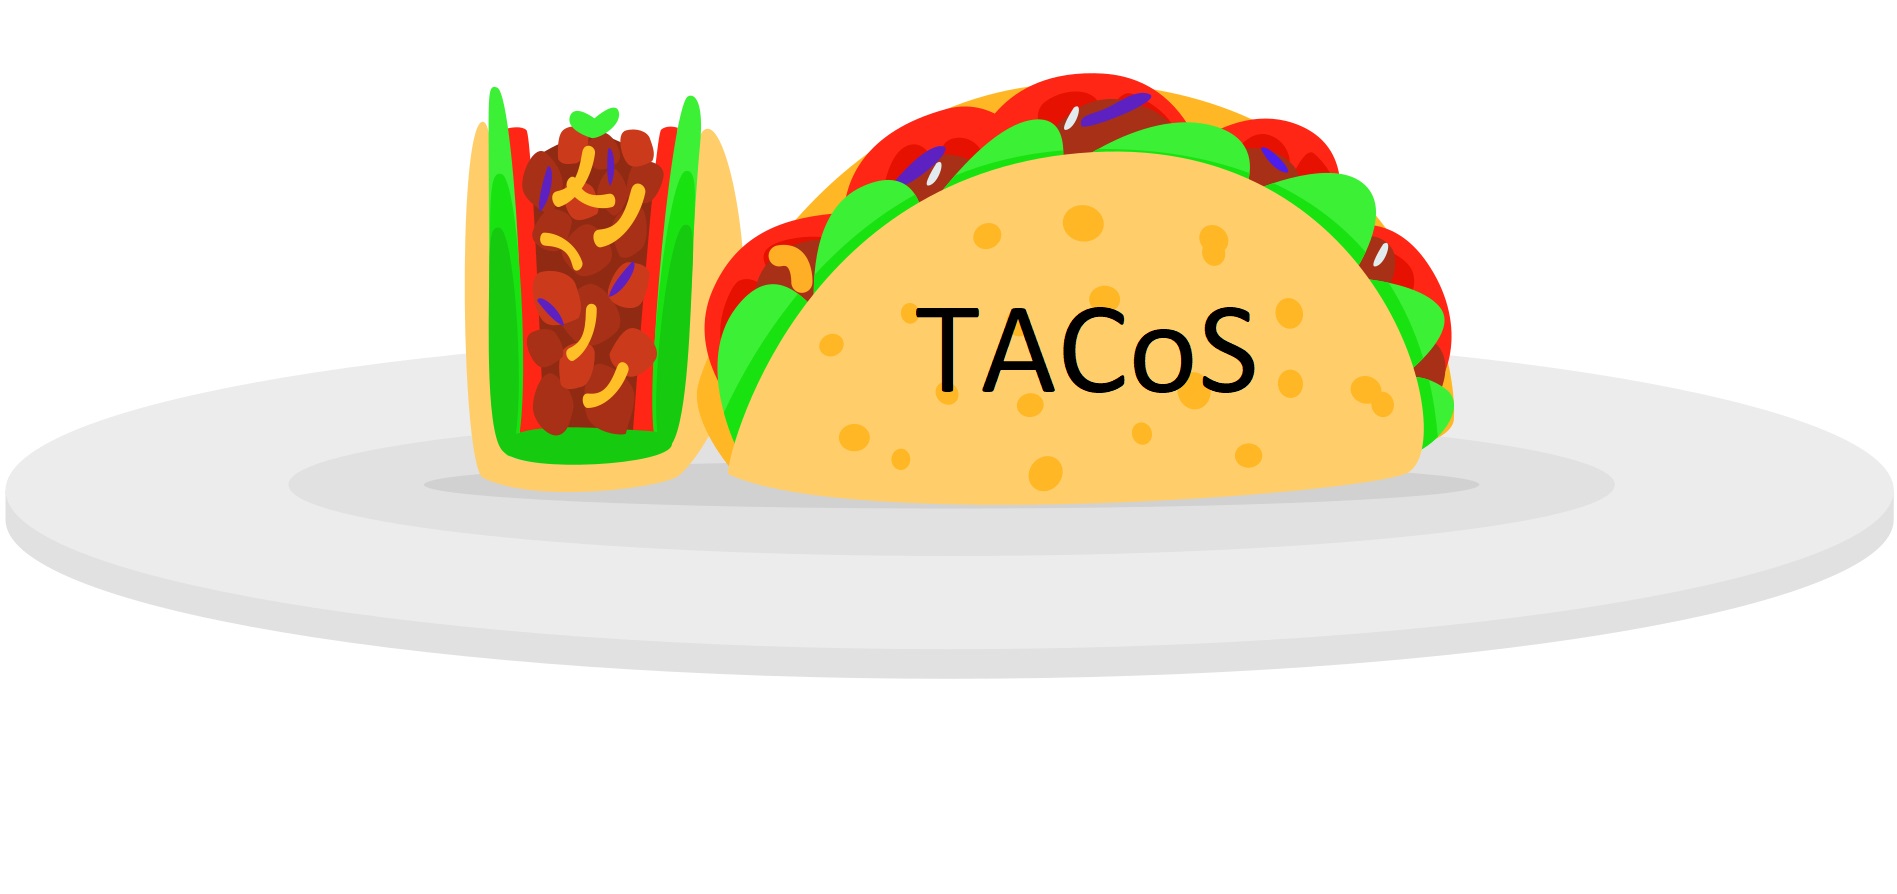 tacos with tacos written on it